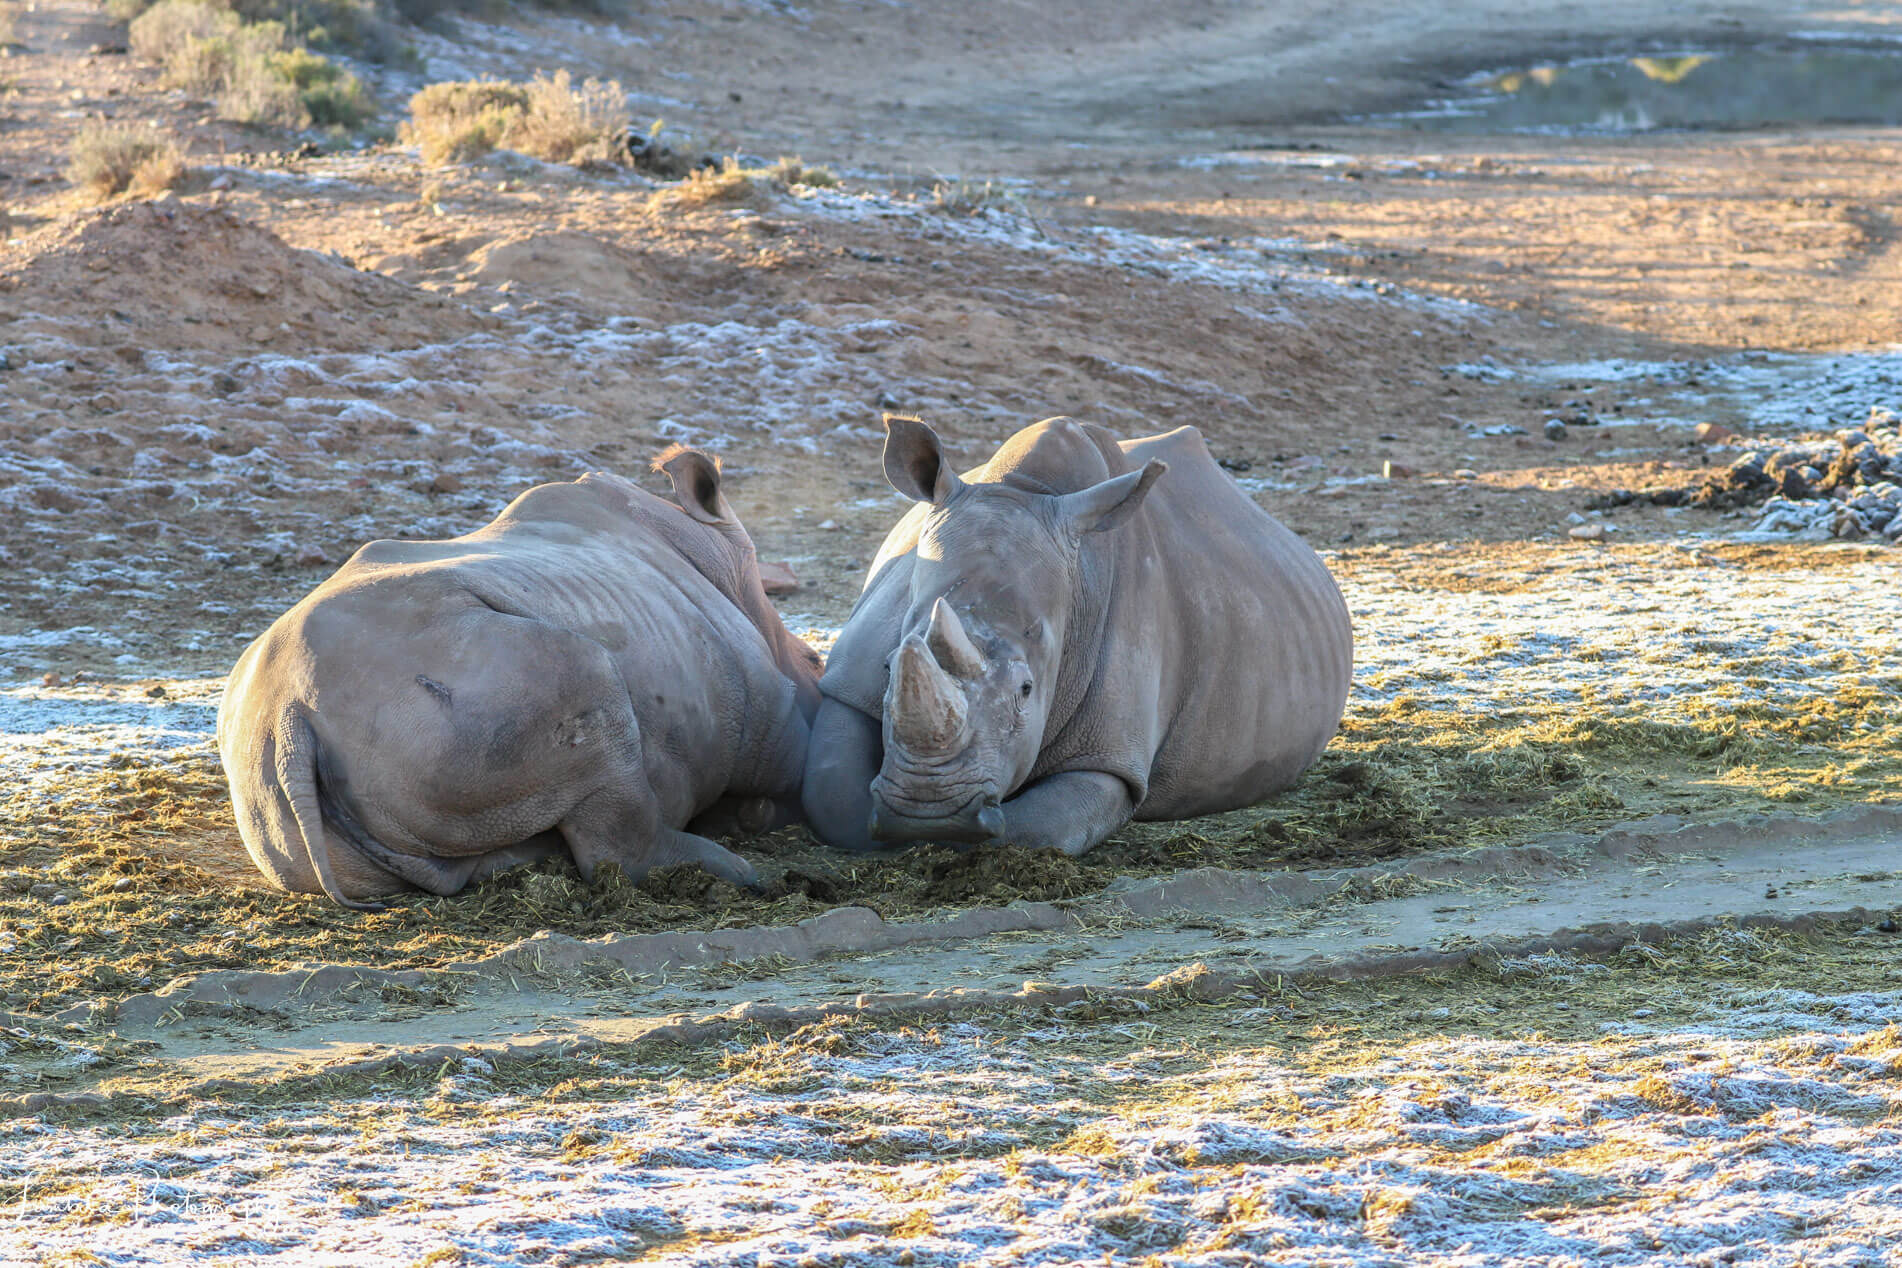 Images of White Rhinos